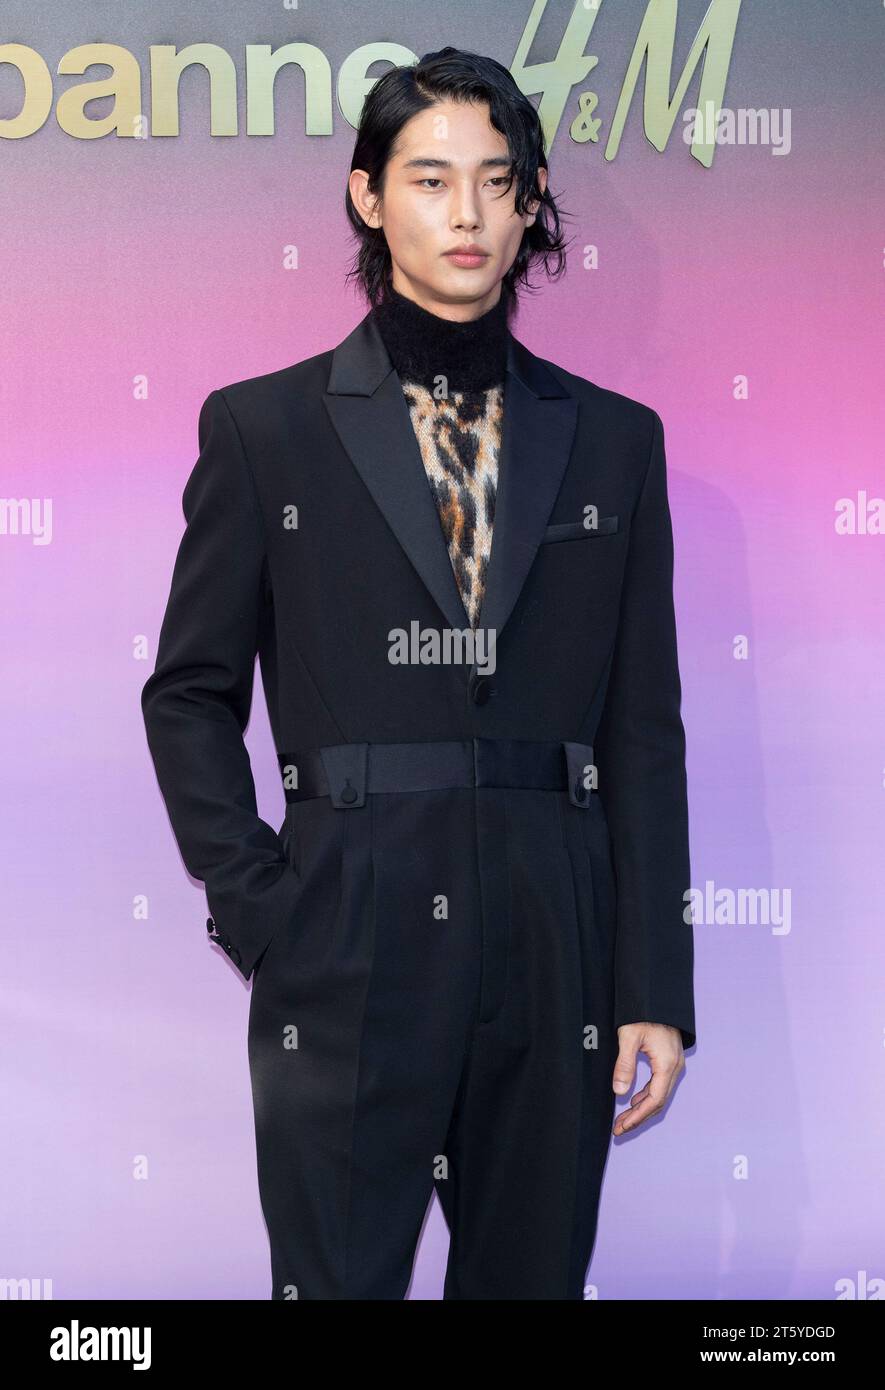 Seoul, South Korea. 7th Nov, 2023. South Korean model Park Tae-min, attends a photocall for the H&M x Rananne Collaboration Event in Seoul South Korea on November 7, 2023. (Photo by: Lee Young-ho/Sipa USA) Credit: Sipa USA/Alamy Live News Stock Photo